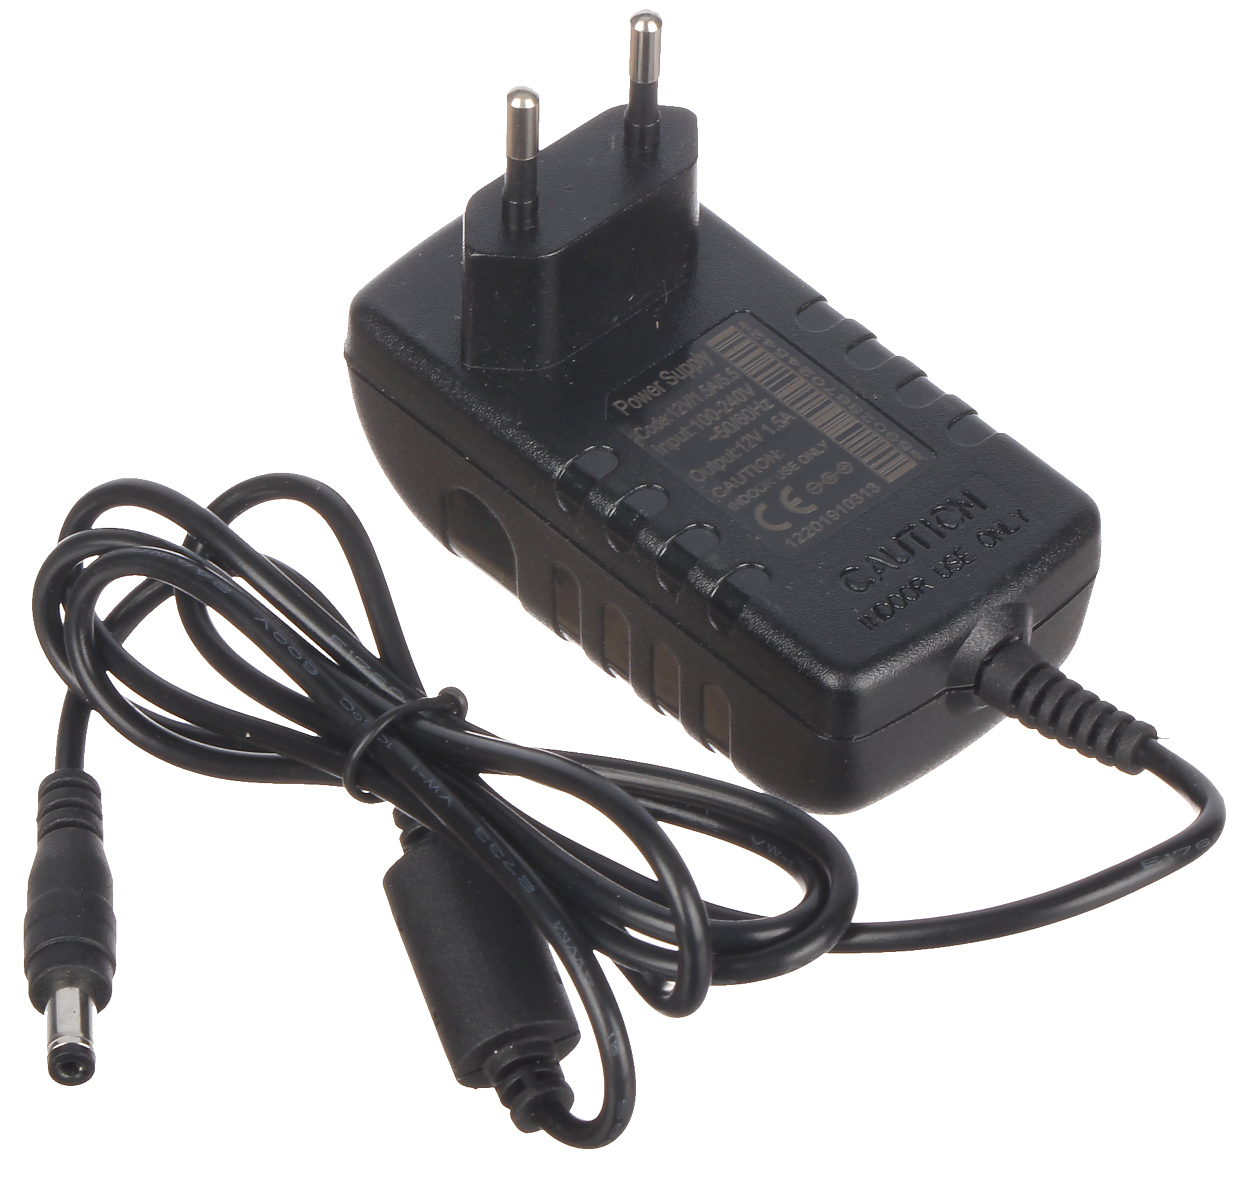 POWER SUPPLY ADAPTER 12V/1.5A/5.5 - With plug, indoor - Delta